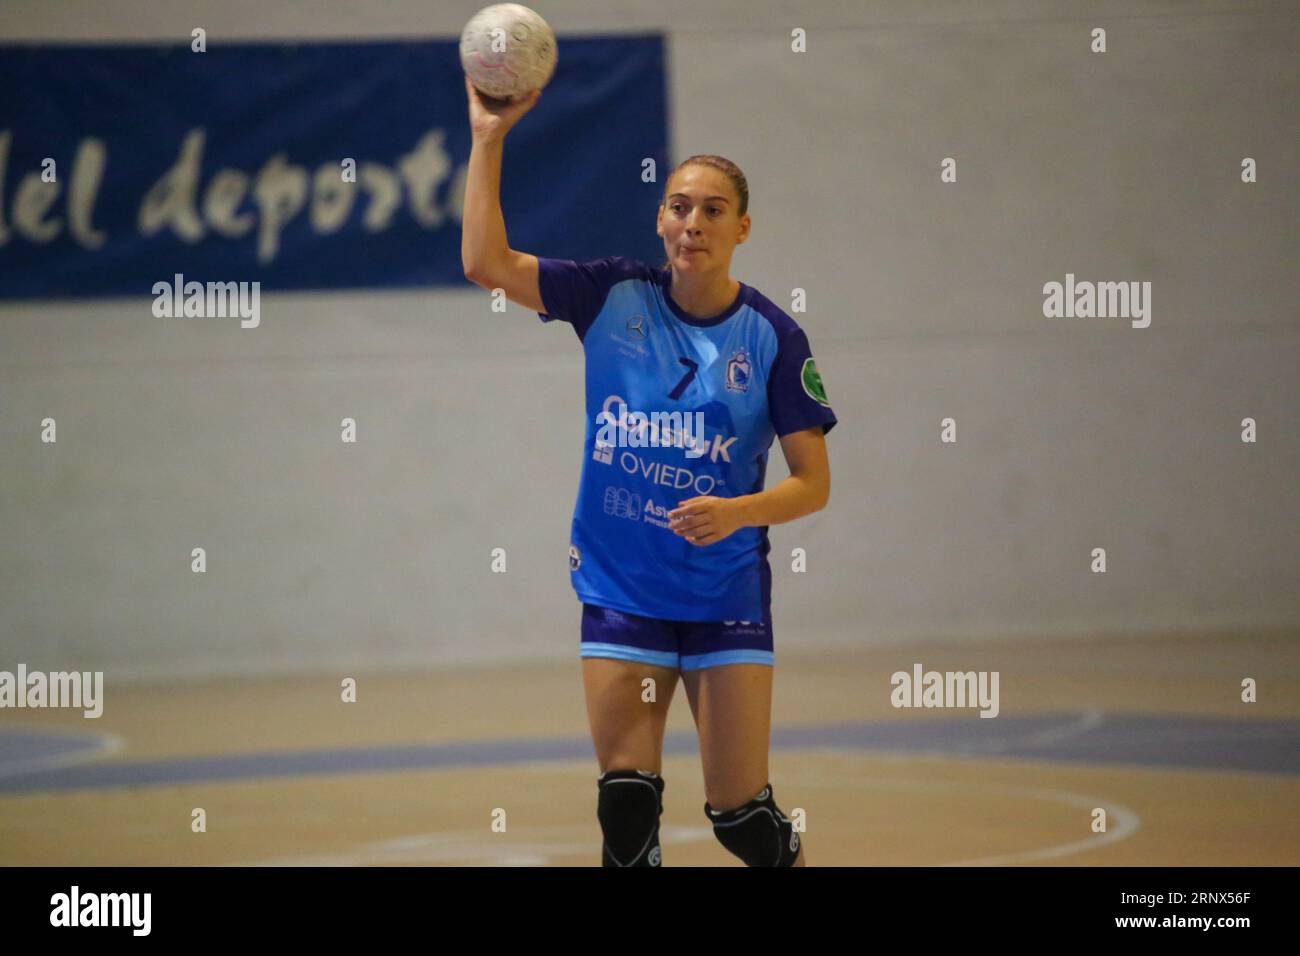 Oviedo, Spain, 02nd September, 2023: The player of Lobas Global Atac Oviedo, Miriam Cortina (7) with the ball during the first day of the Liga Guerreras Iberdrola between Lobas Global Atac Oviedo and Caja Rural Aula Valladolid, on 02 September 2023, at the Florida Arena Municipal Sports Center, in Oviedo, Spain. Credit: Alberto Brevers / Alamy Live News. Stock Photo